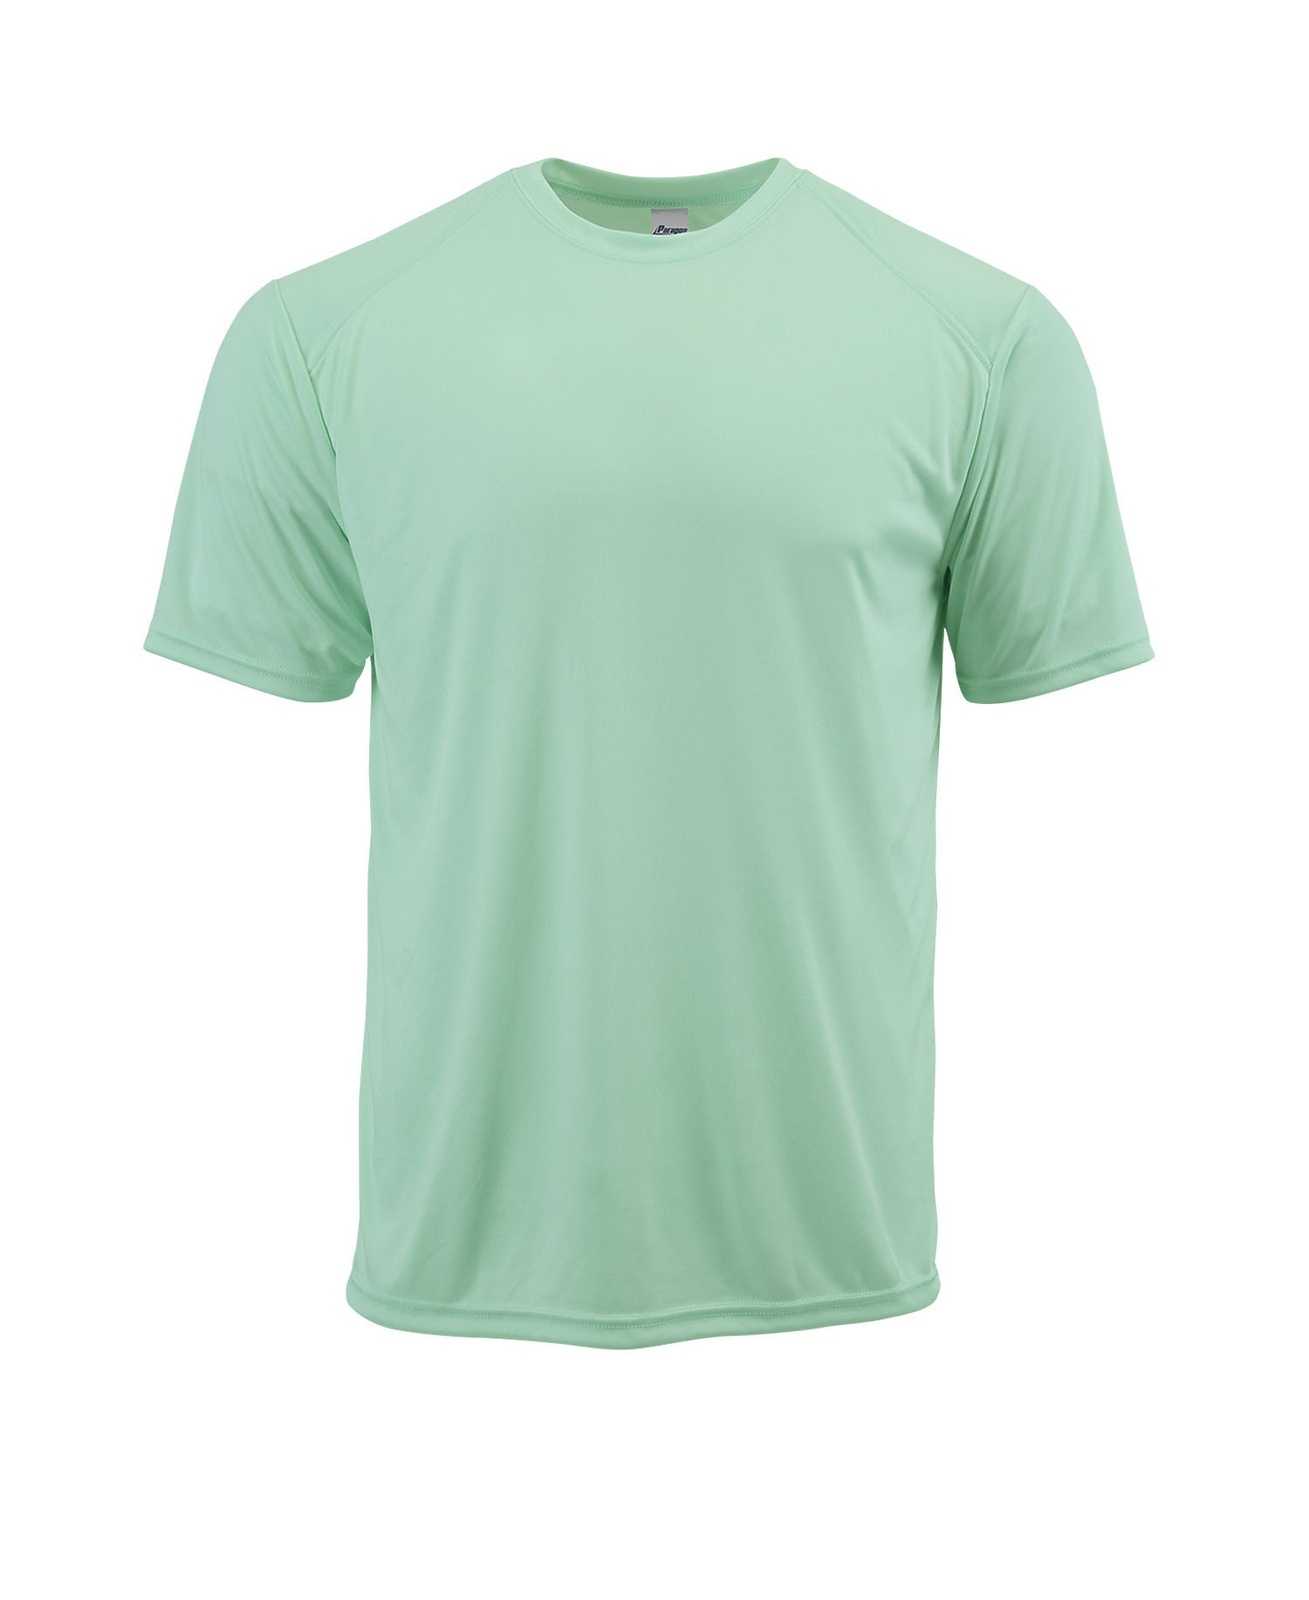 Paragon 200 Adult Performance Tee - Mint Green - HIT a Double